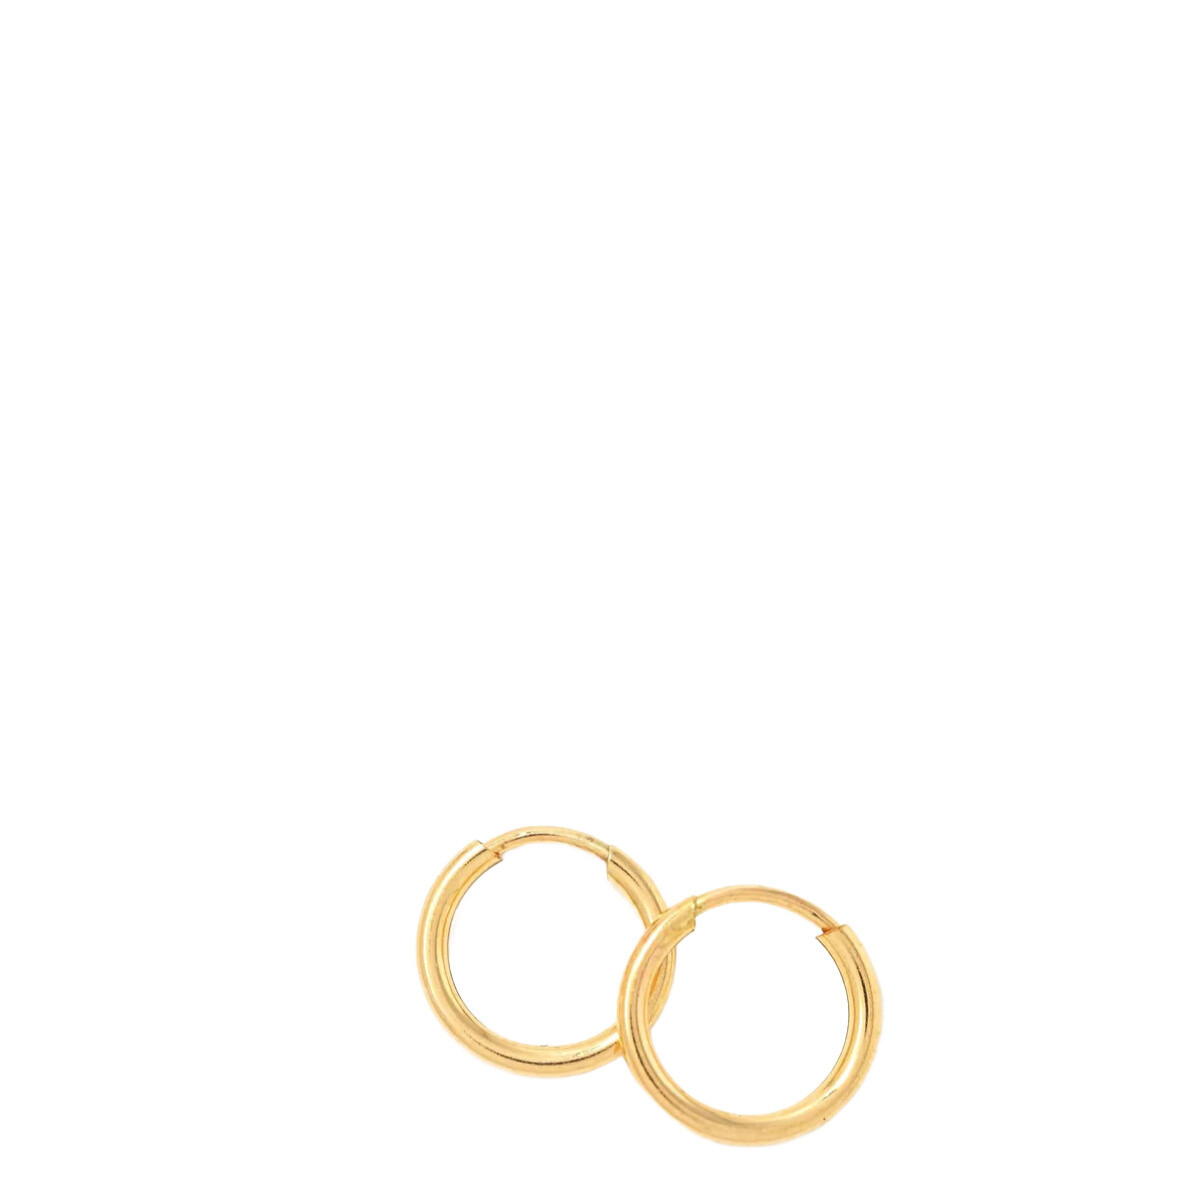 Lover's Tempo 9mm Gold-Filled Infinity Hoop Earrings